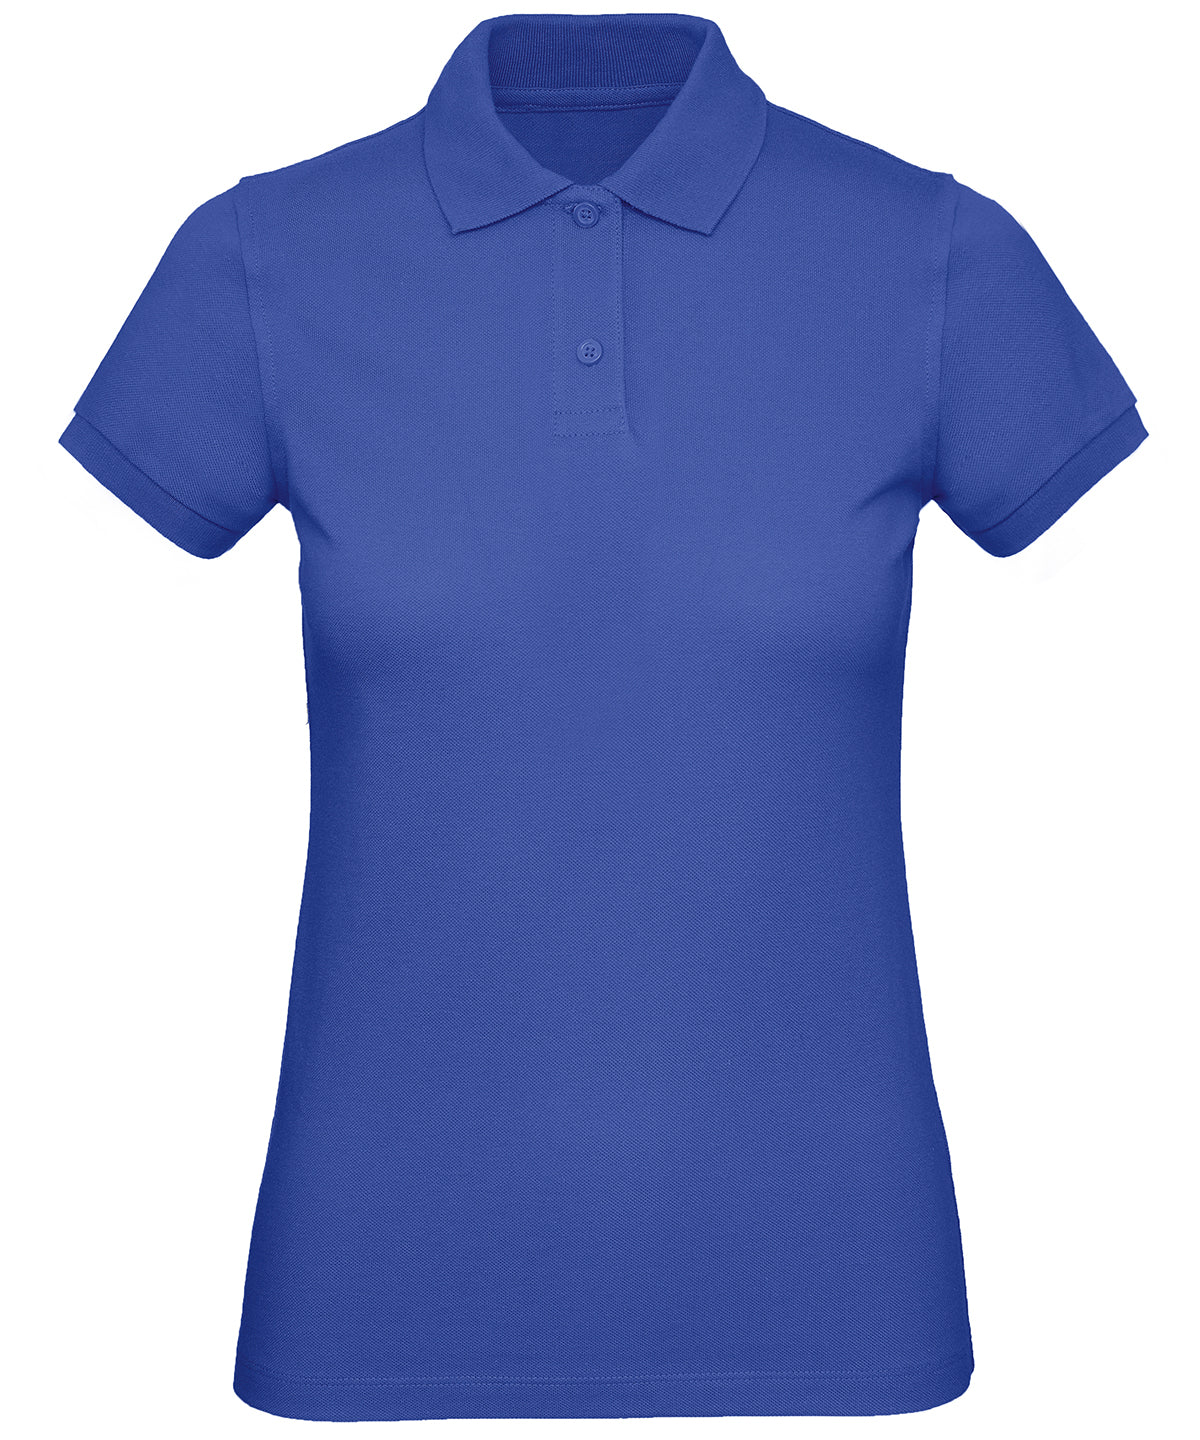 Personalised Polo Shirts - Black B&C Collection B&C Inspire Polo /women